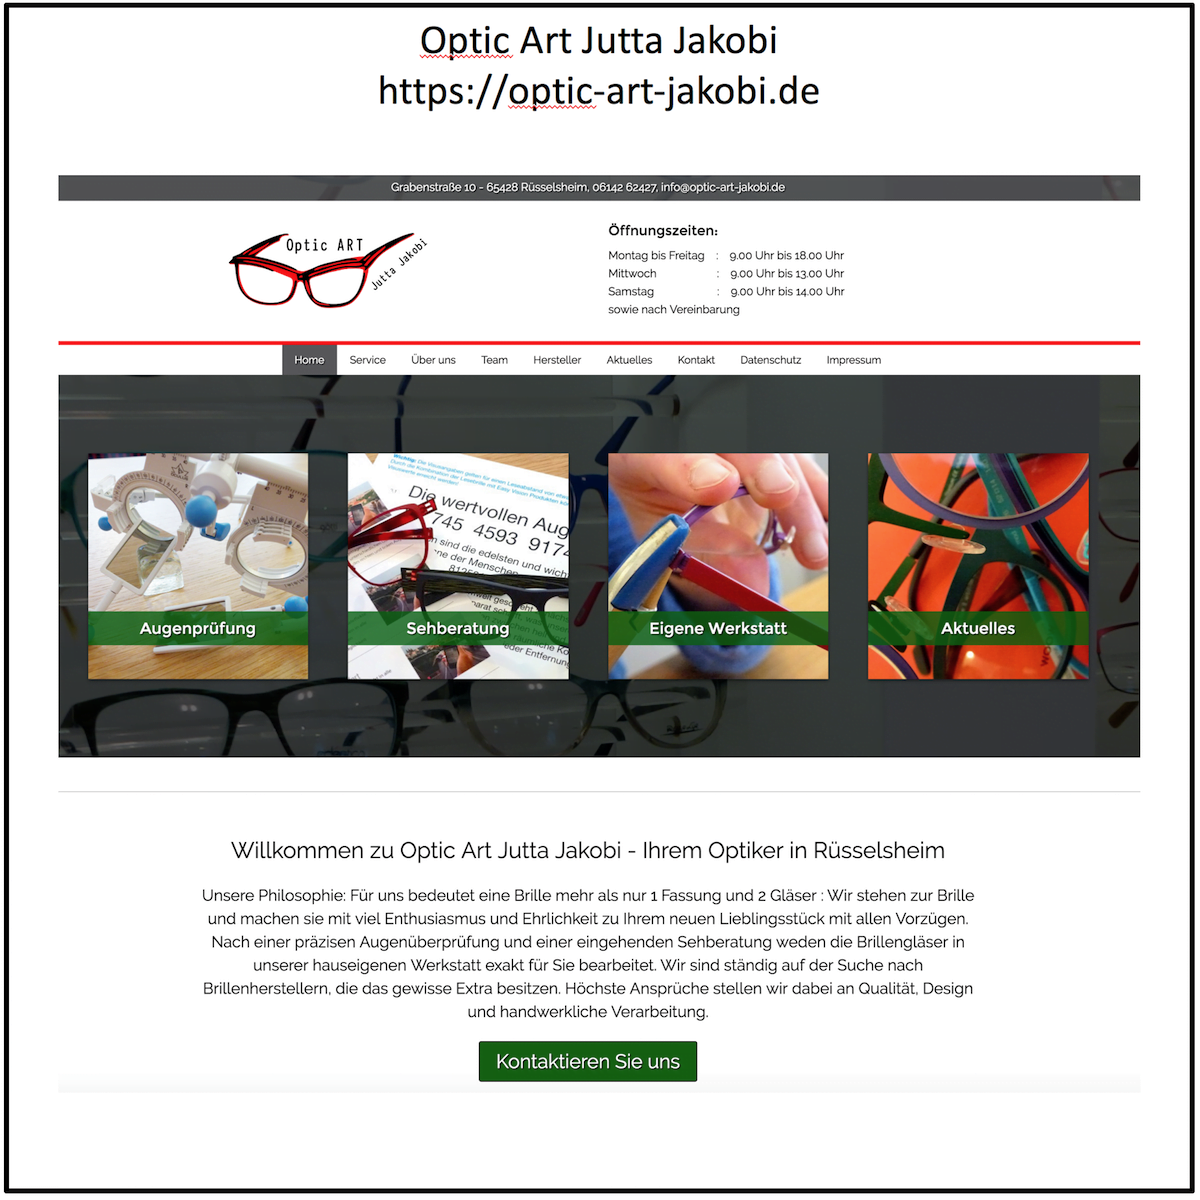 Opticians website with glasses and services.